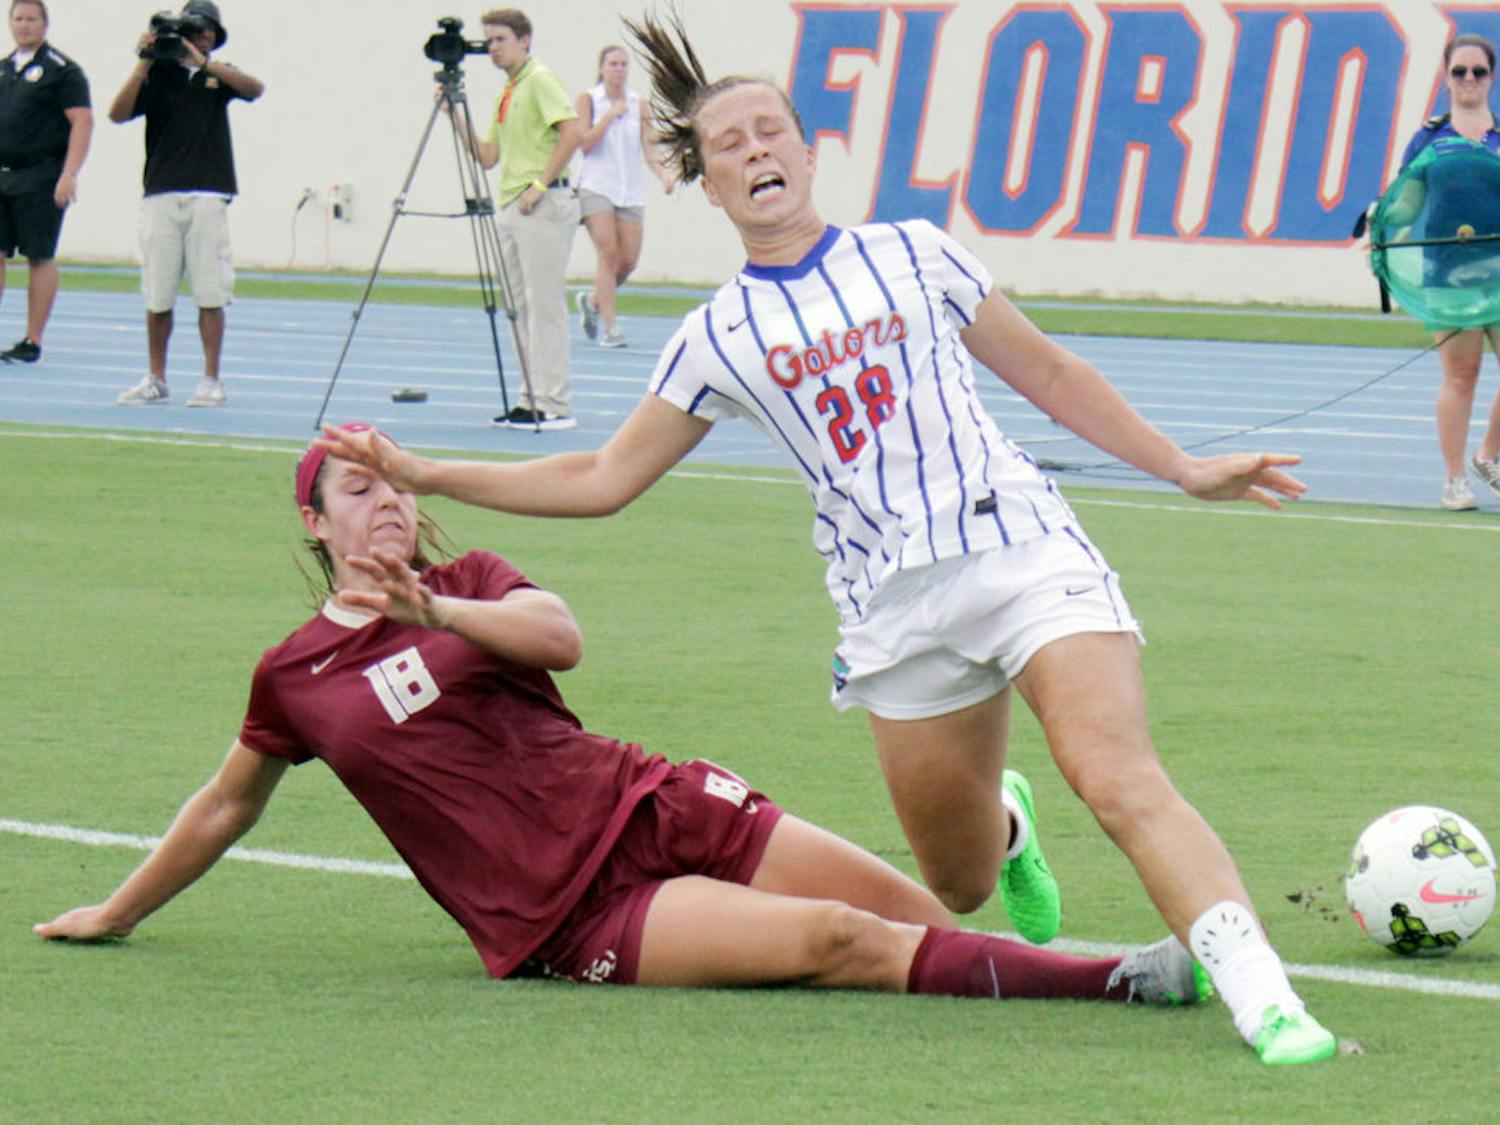 UF midfielder Meggie Dougherty-Howard screams as her leg is hit by an FSU defender during Florida's 3-2 win on Aug. 30, 2015, at James G. Pressly Stadium. Dougherty-Howard returned to the game.